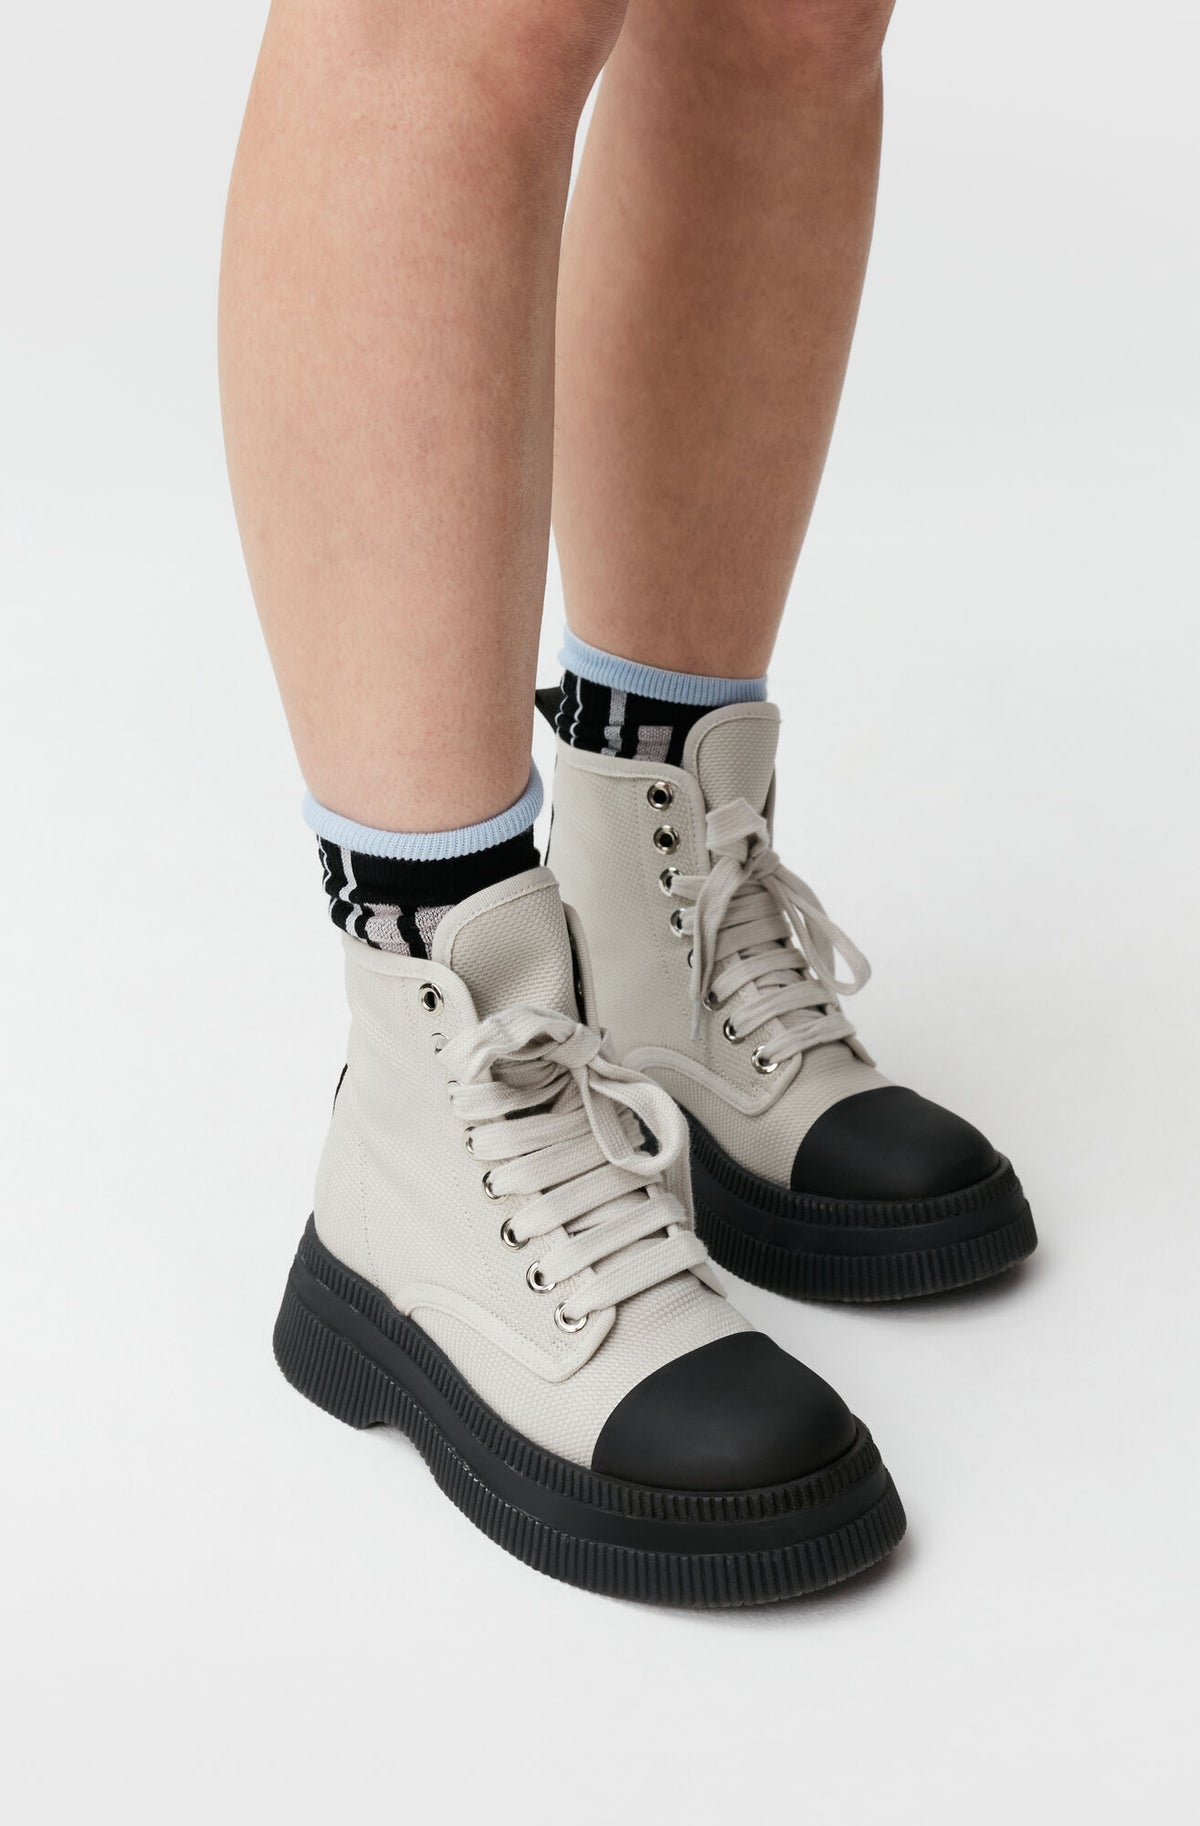 GANNI S1760 Creepers Boot in Egret